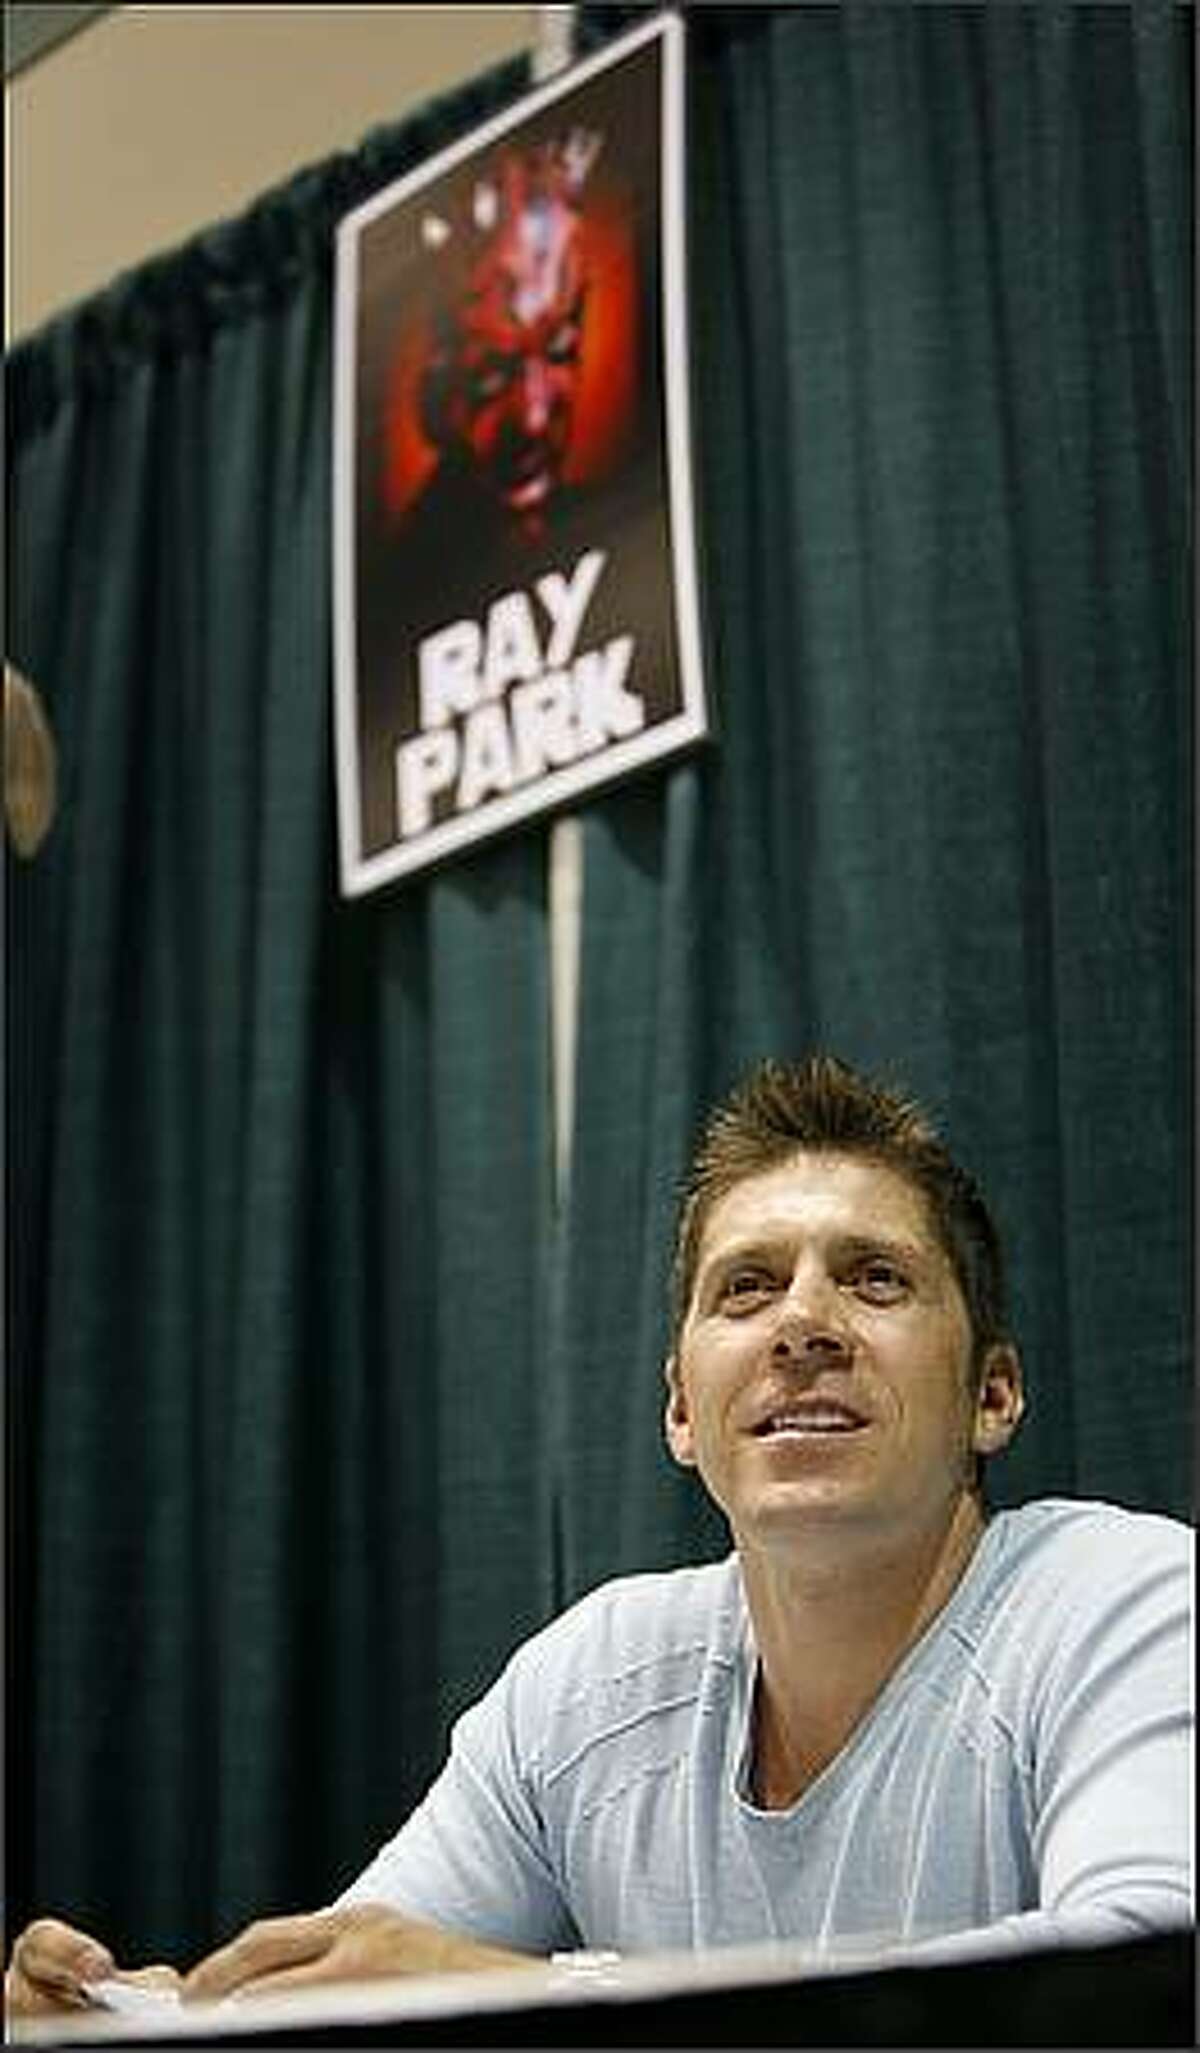 Ray Park, the actor who played Darth Maul in Star Wars: Episode I - The Phantom Menace, signs autographs for fans at the Emerald City ComiCon.